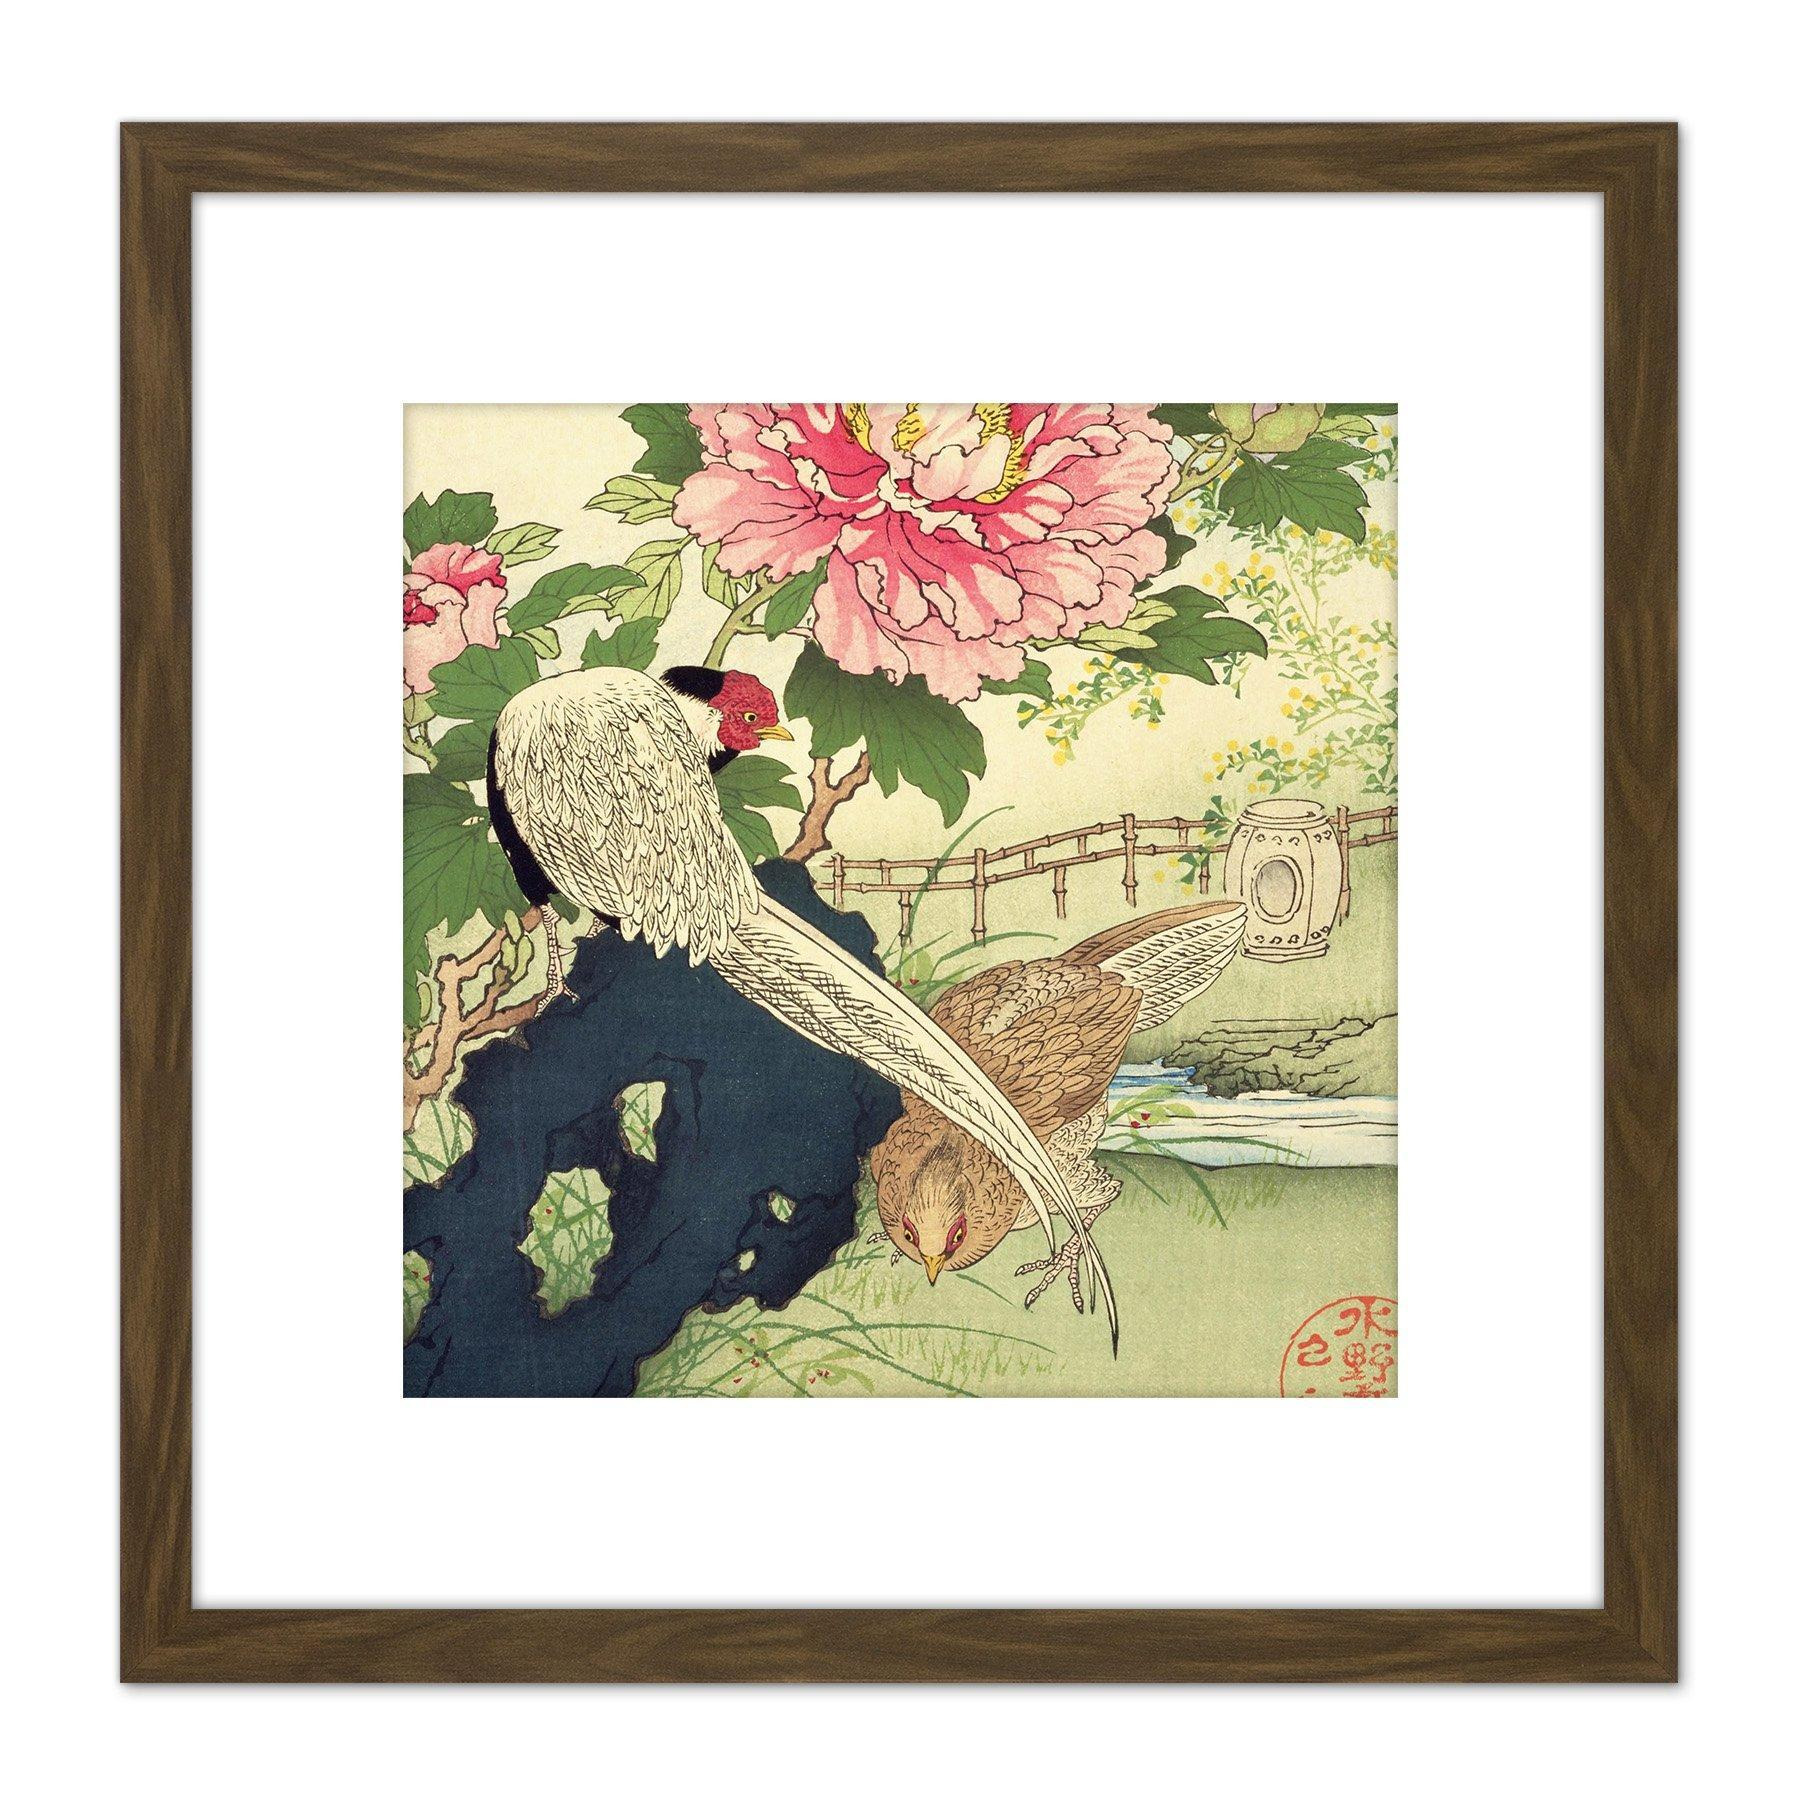 Bairei Kacho Gafu Spring Peony And Silver Pheasants 8X8 Inch Square Wooden Framed Wall Art Print Picture with Mount - image 1